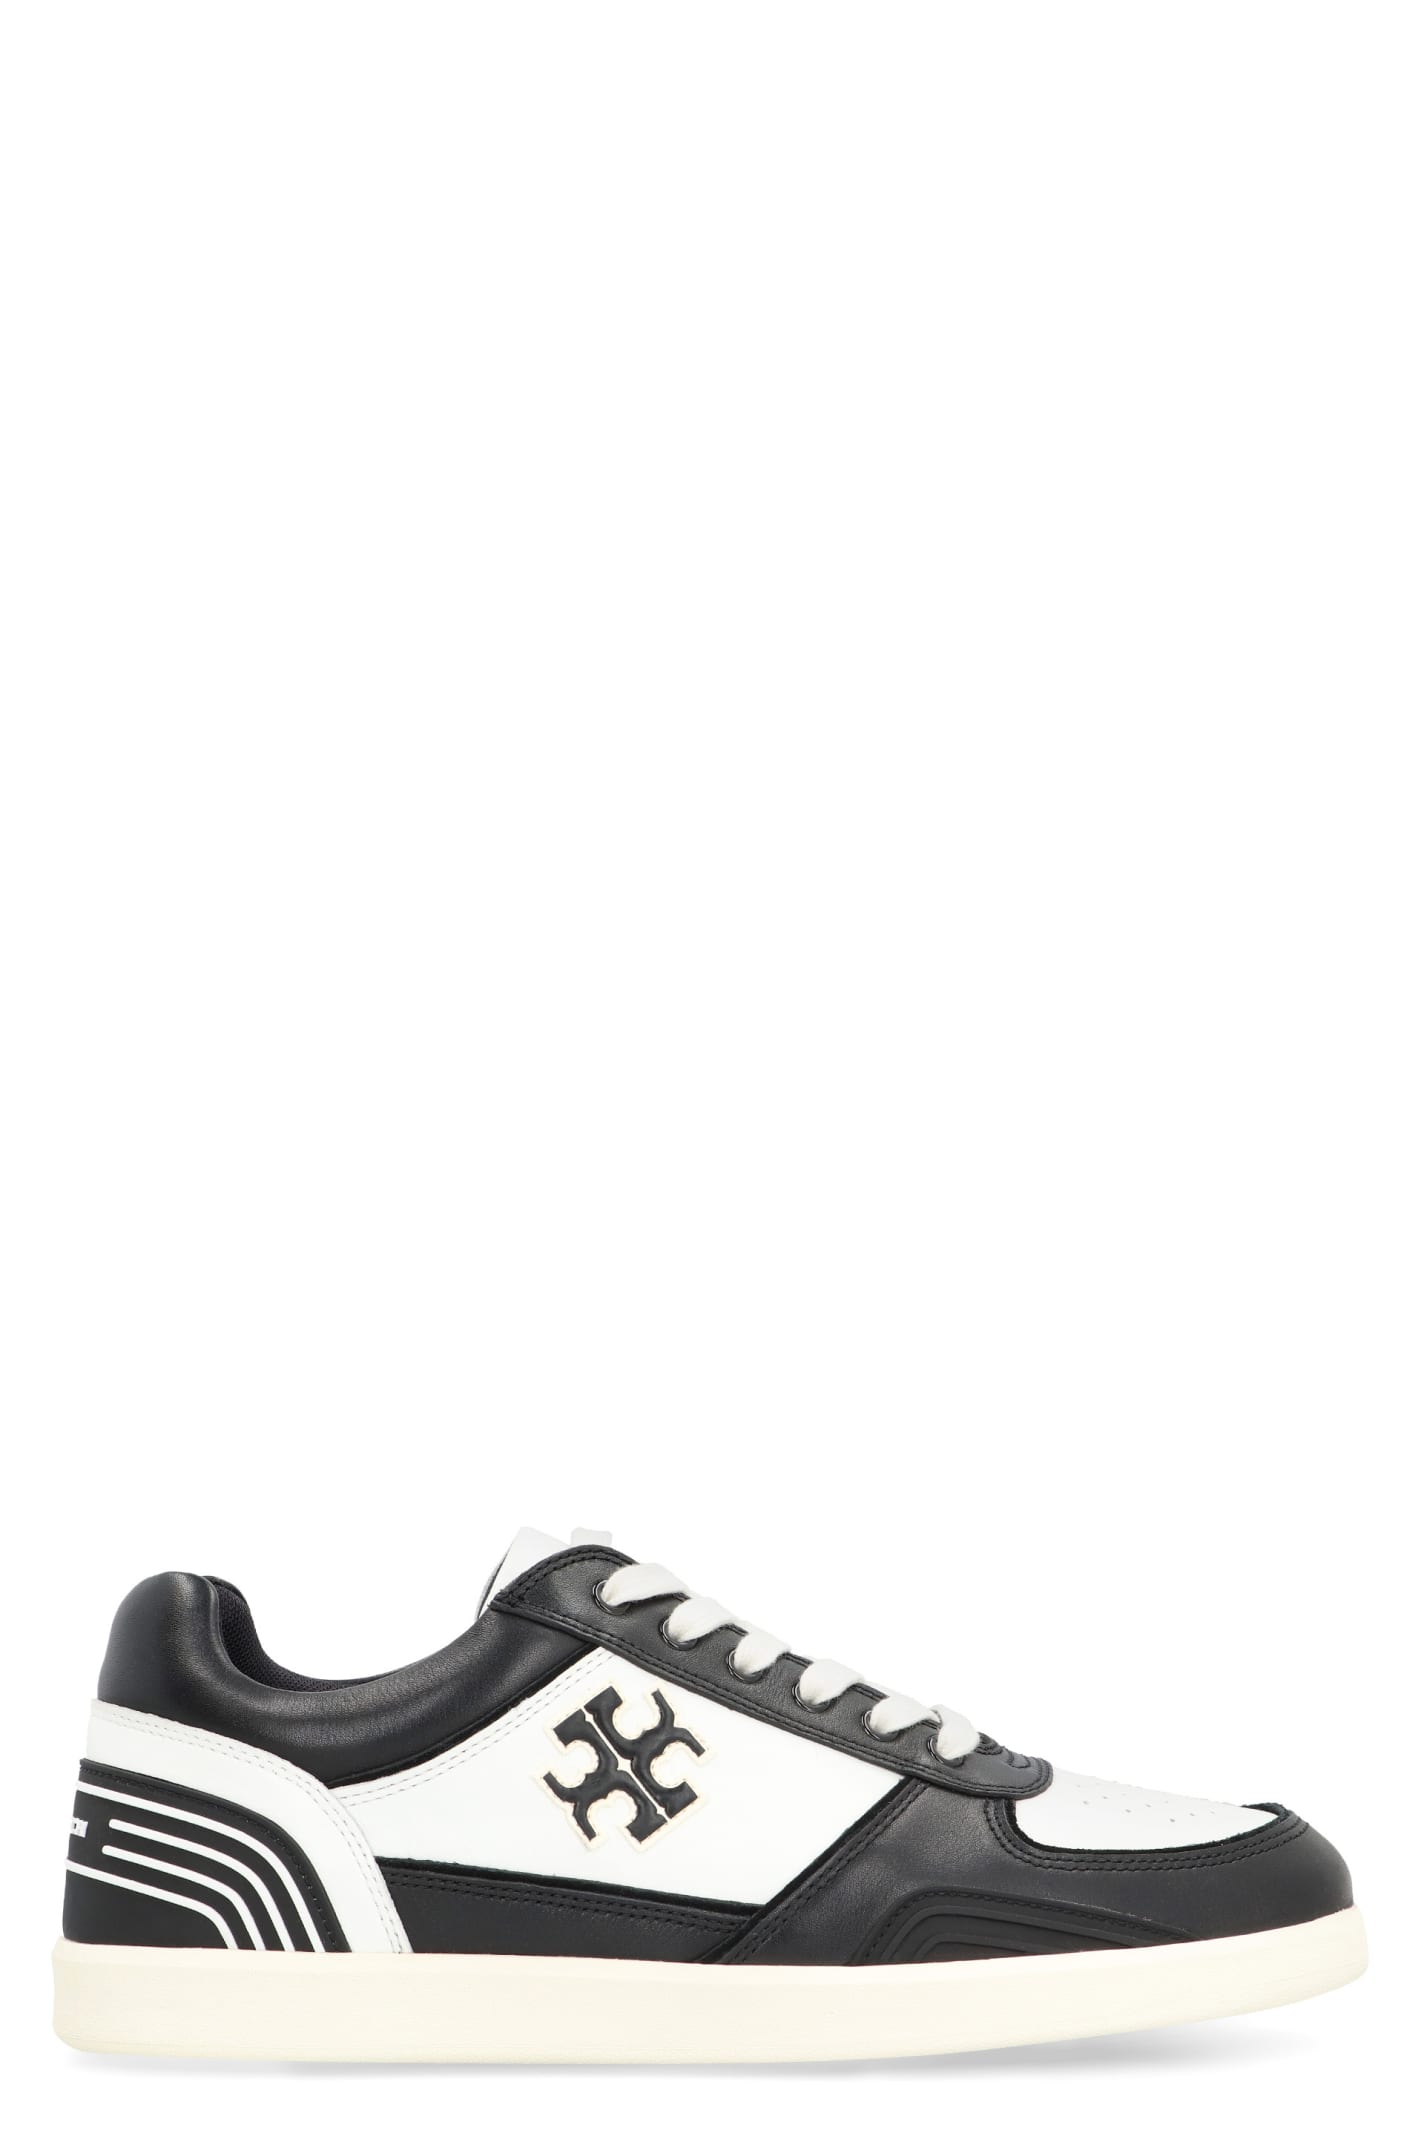 Shop Tory Burch Clover Court Leather Low-top Sneakers In Purity / Perfect Black